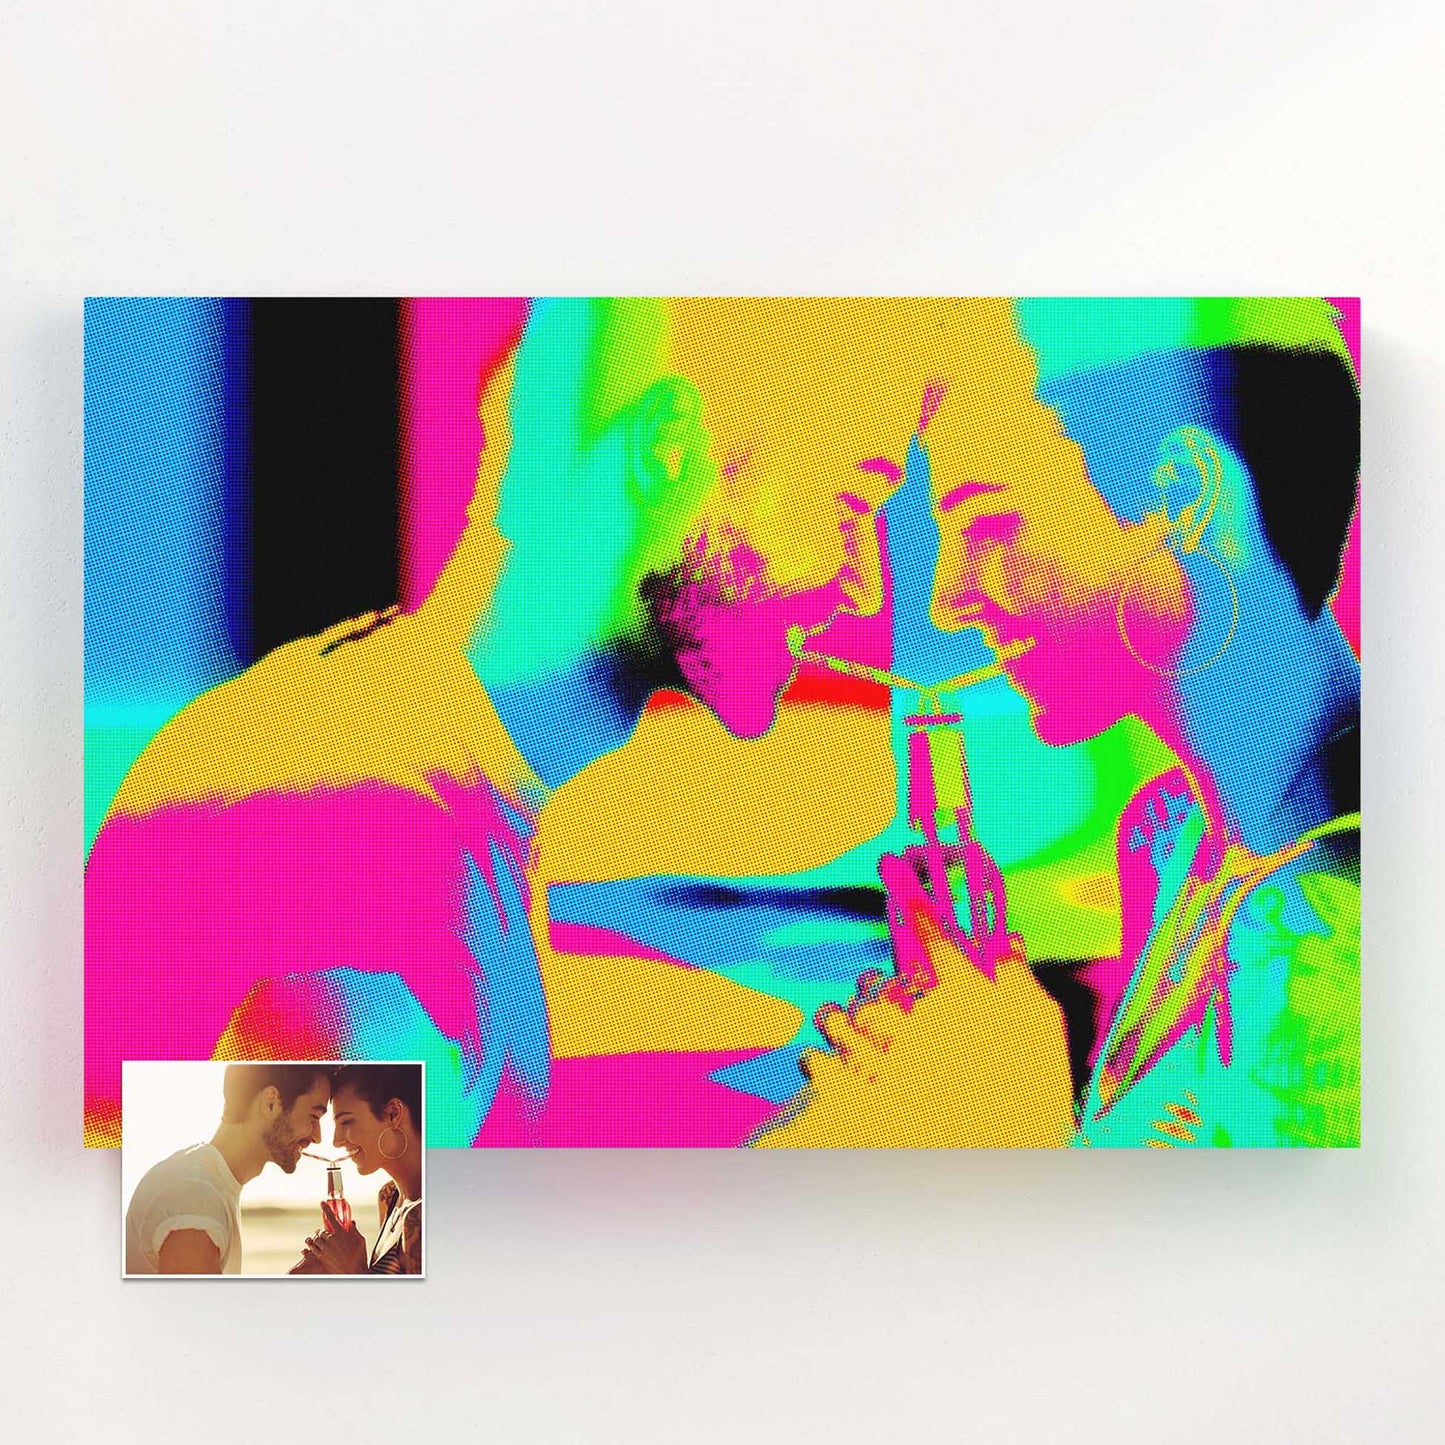 Bring your photo to life with a personalized Pop Art Canvas. Handcrafted on a textured canvas, this unique artwork showcases the cool and trendy urban style. With a burst of full-color digital art and its vibrant energy